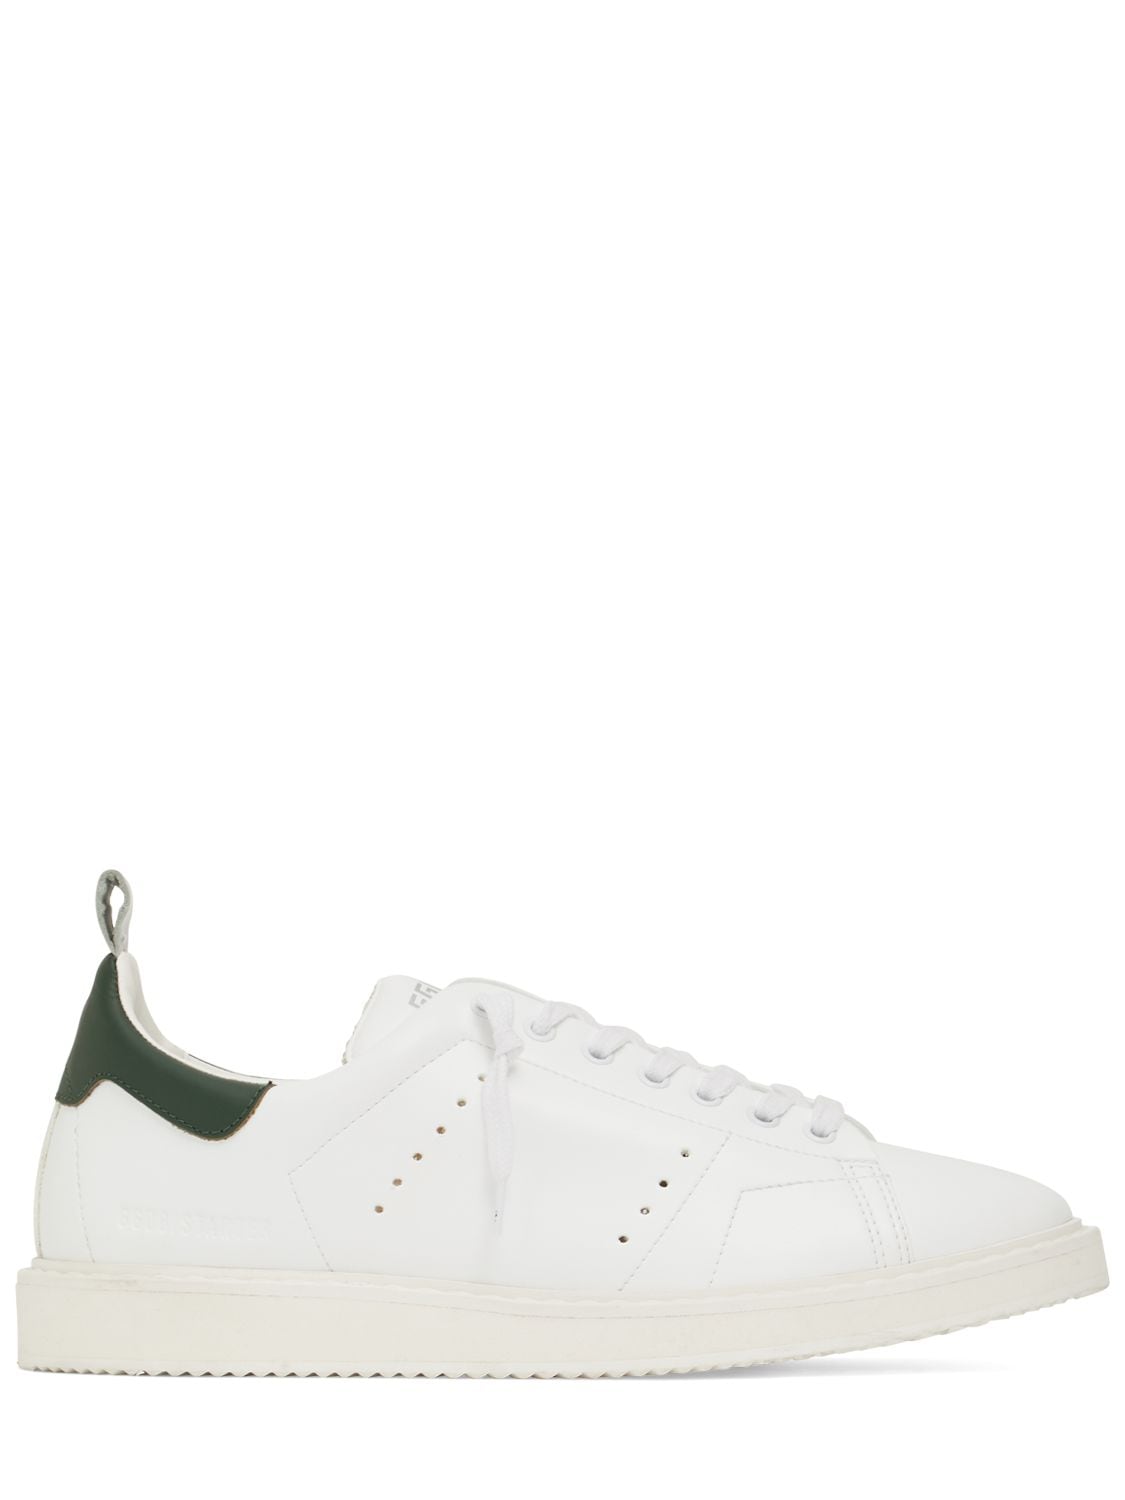 Golden Goose 20mm Starter Leather Sneakers In White,green